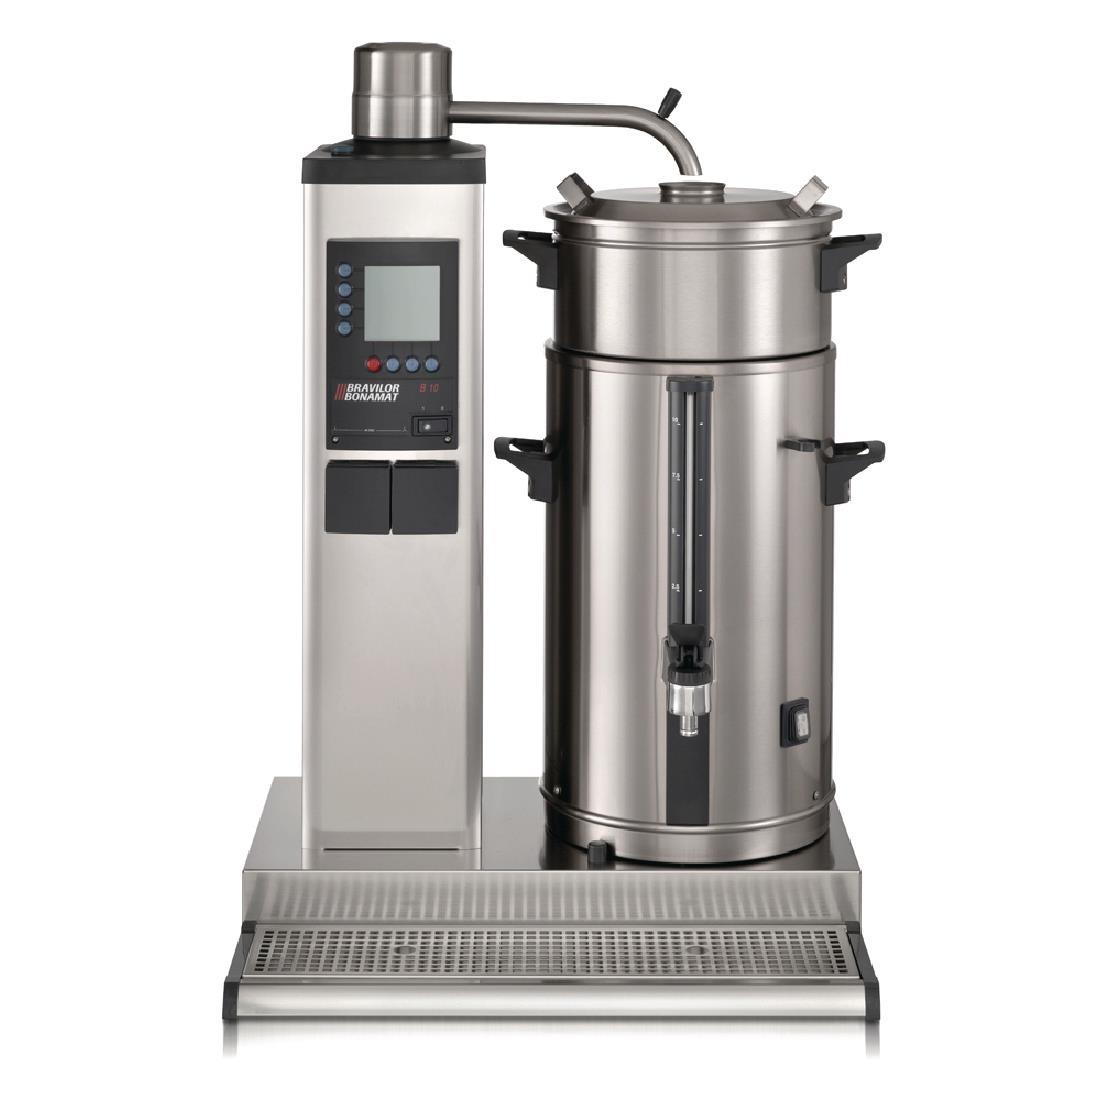 Bravilor B10 R Bulk Coffee Brewer with 10Ltr Coffee Urn Single Phase - DC677-1P  - 2